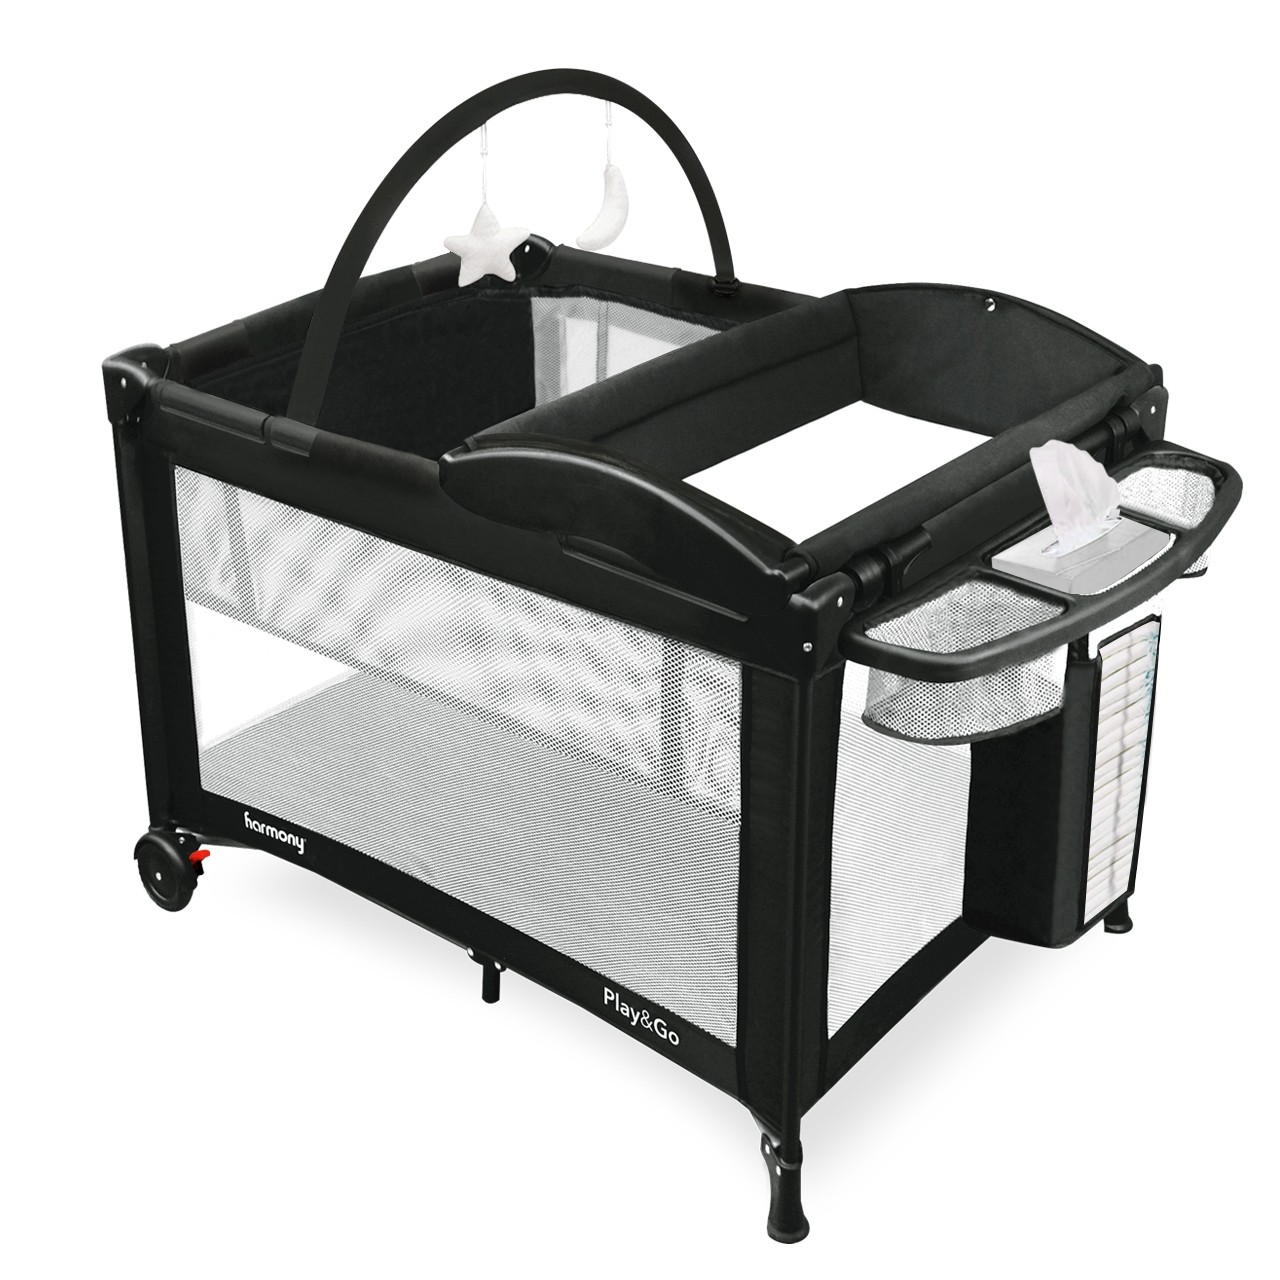 Play & Go Playard - All-in-One